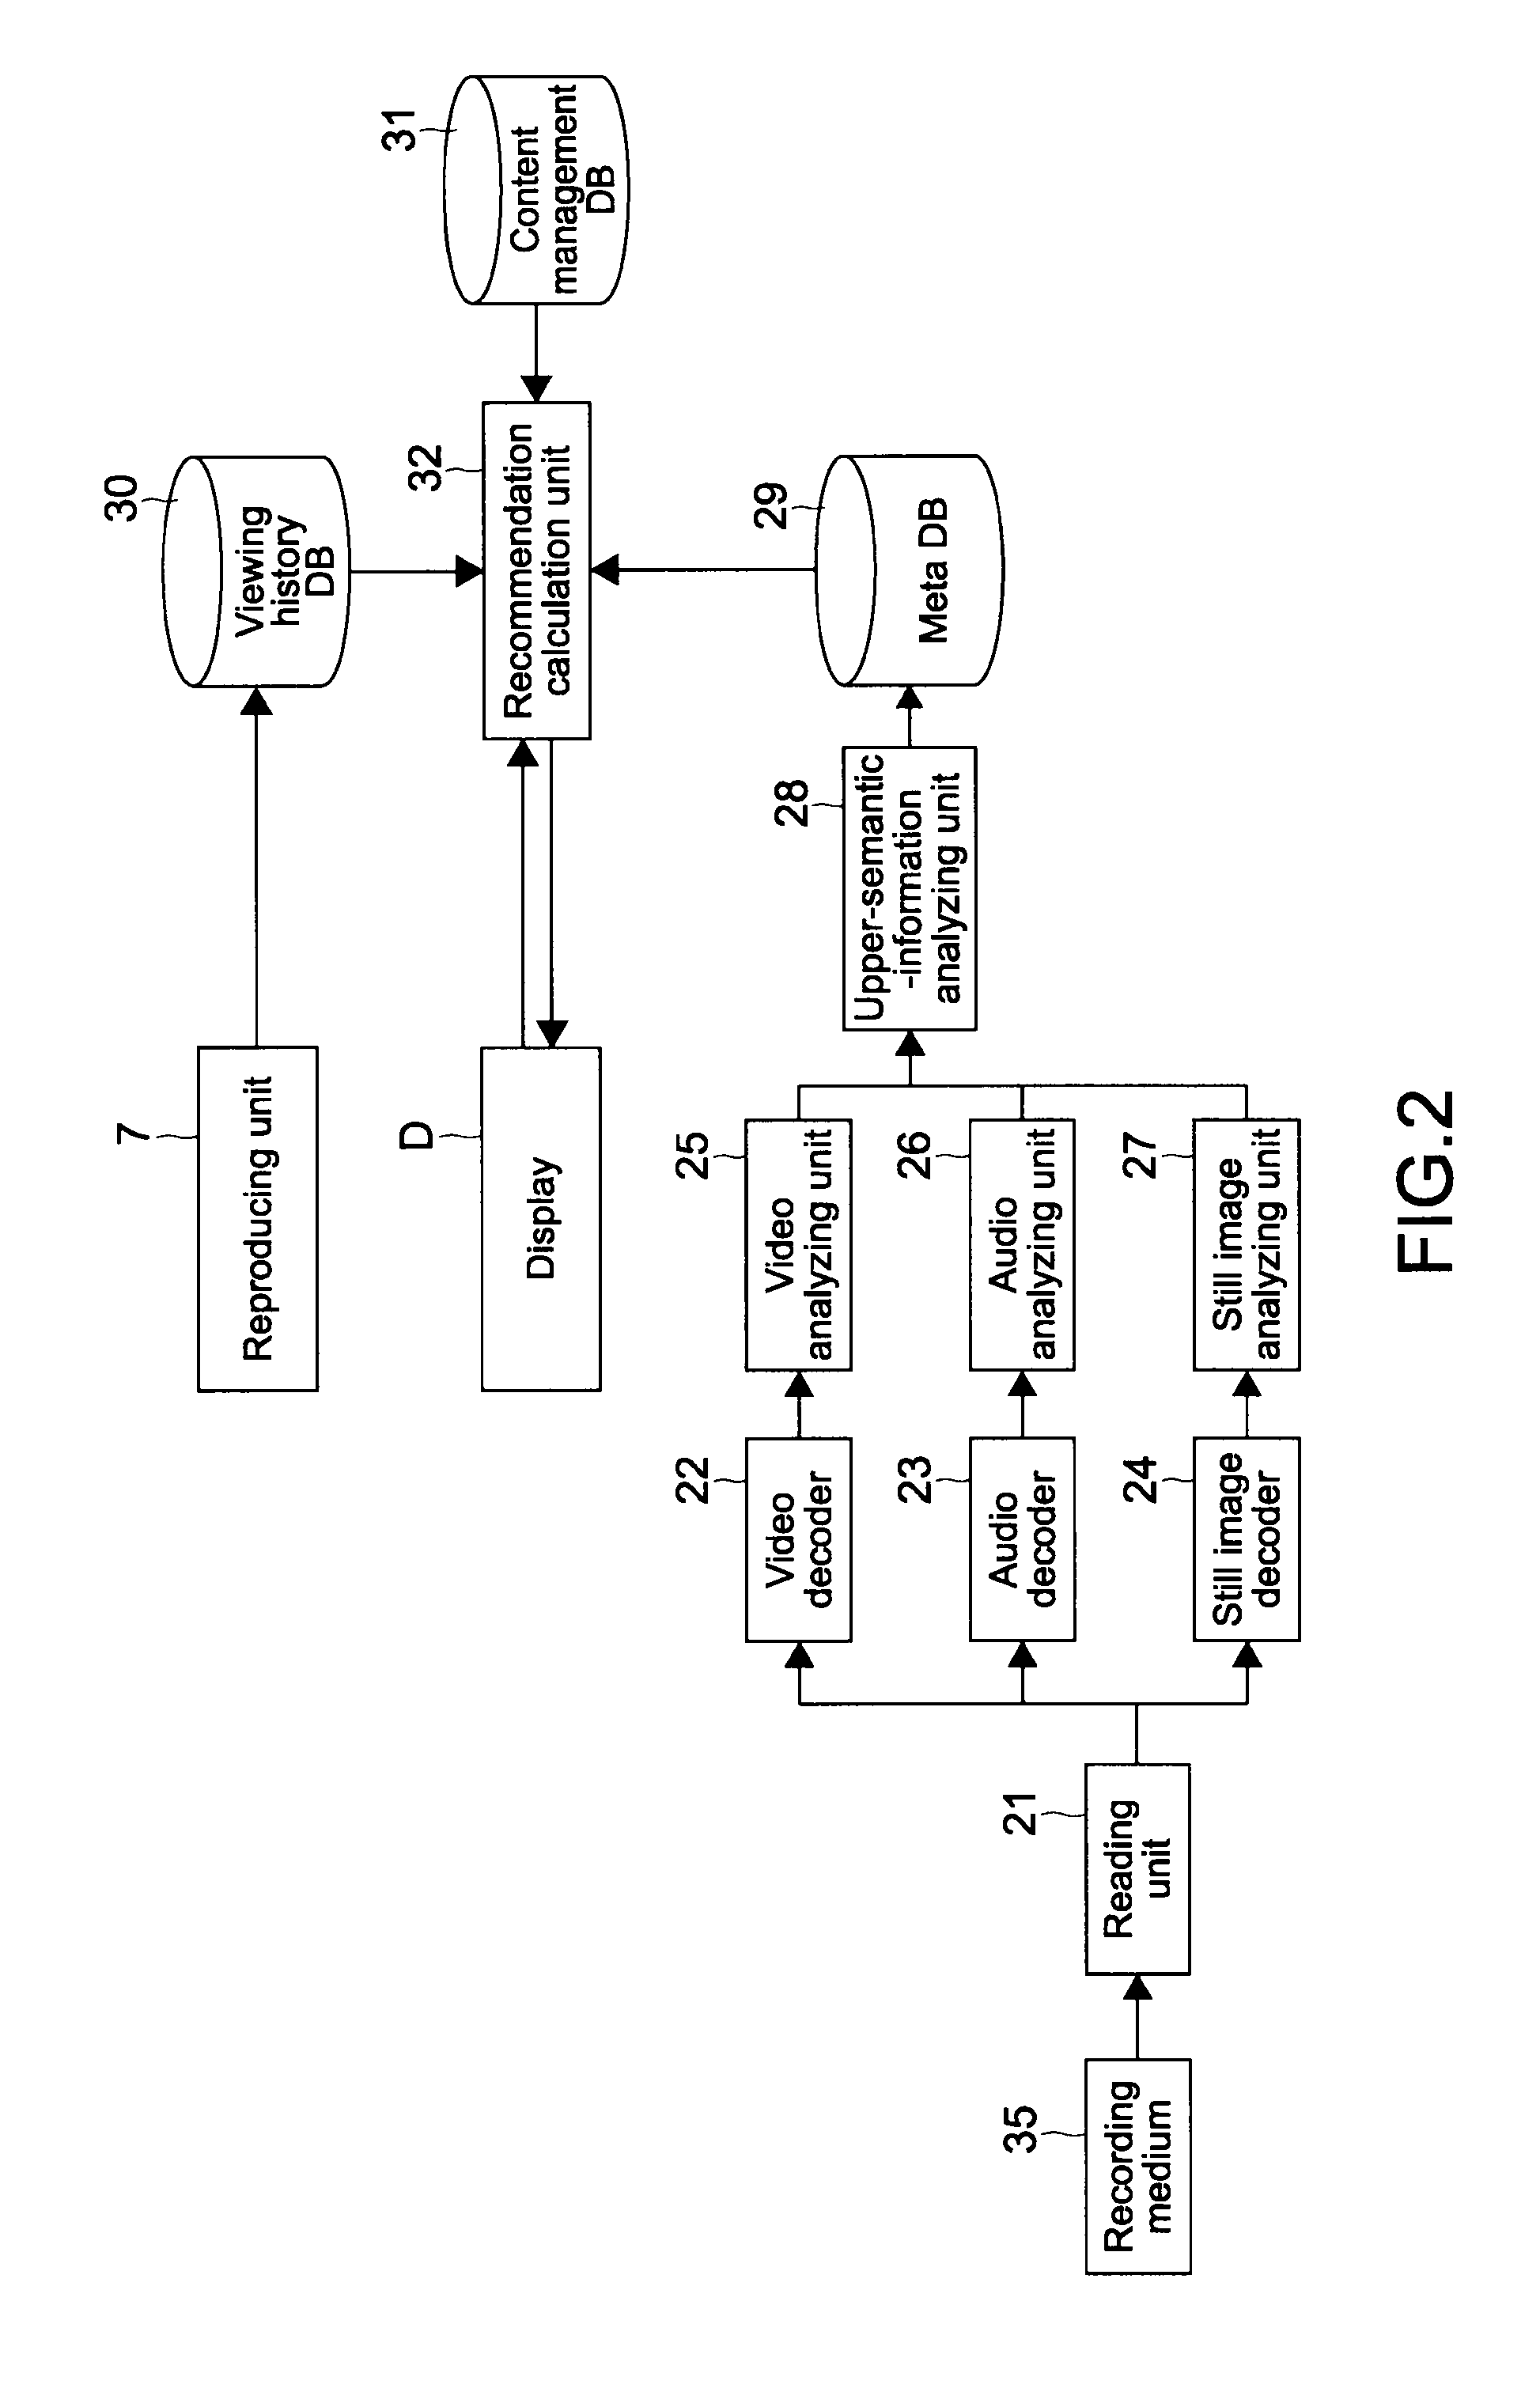 Electronic apparatus, content recommendation method, and program therefor